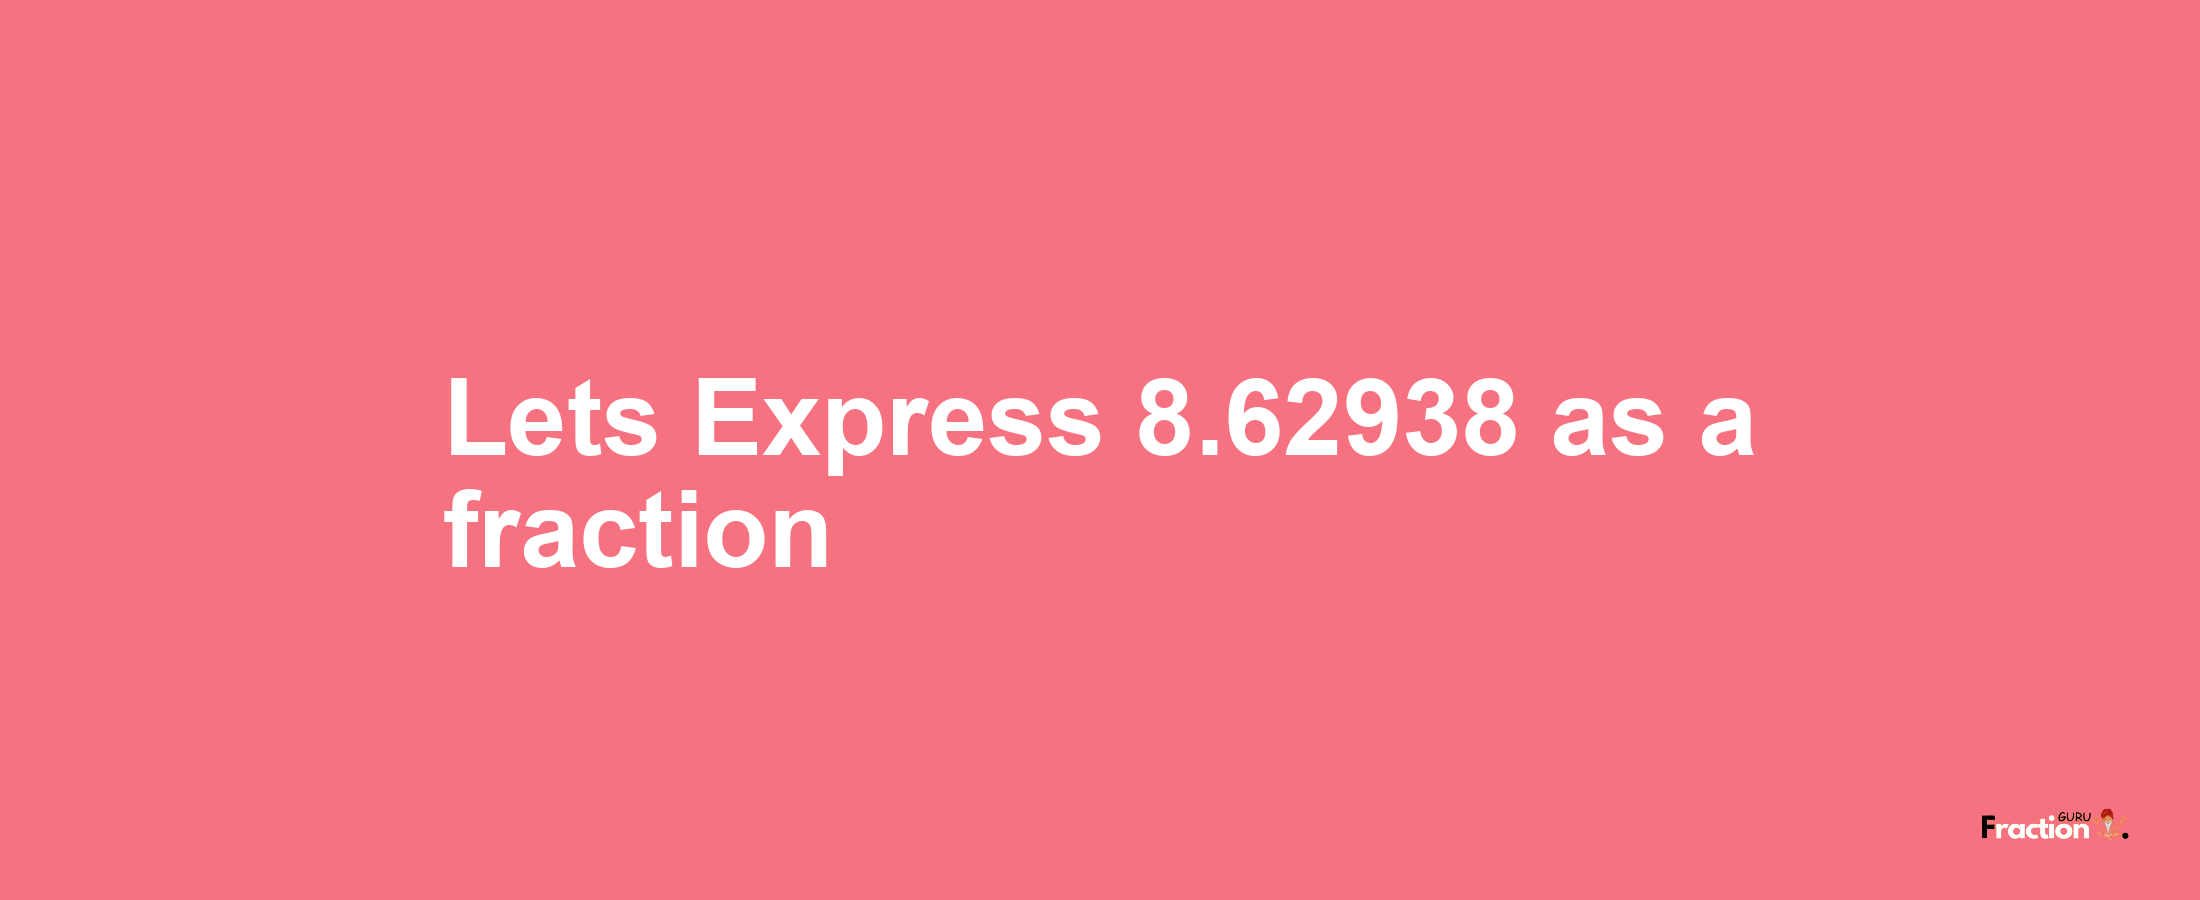 Lets Express 8.62938 as afraction